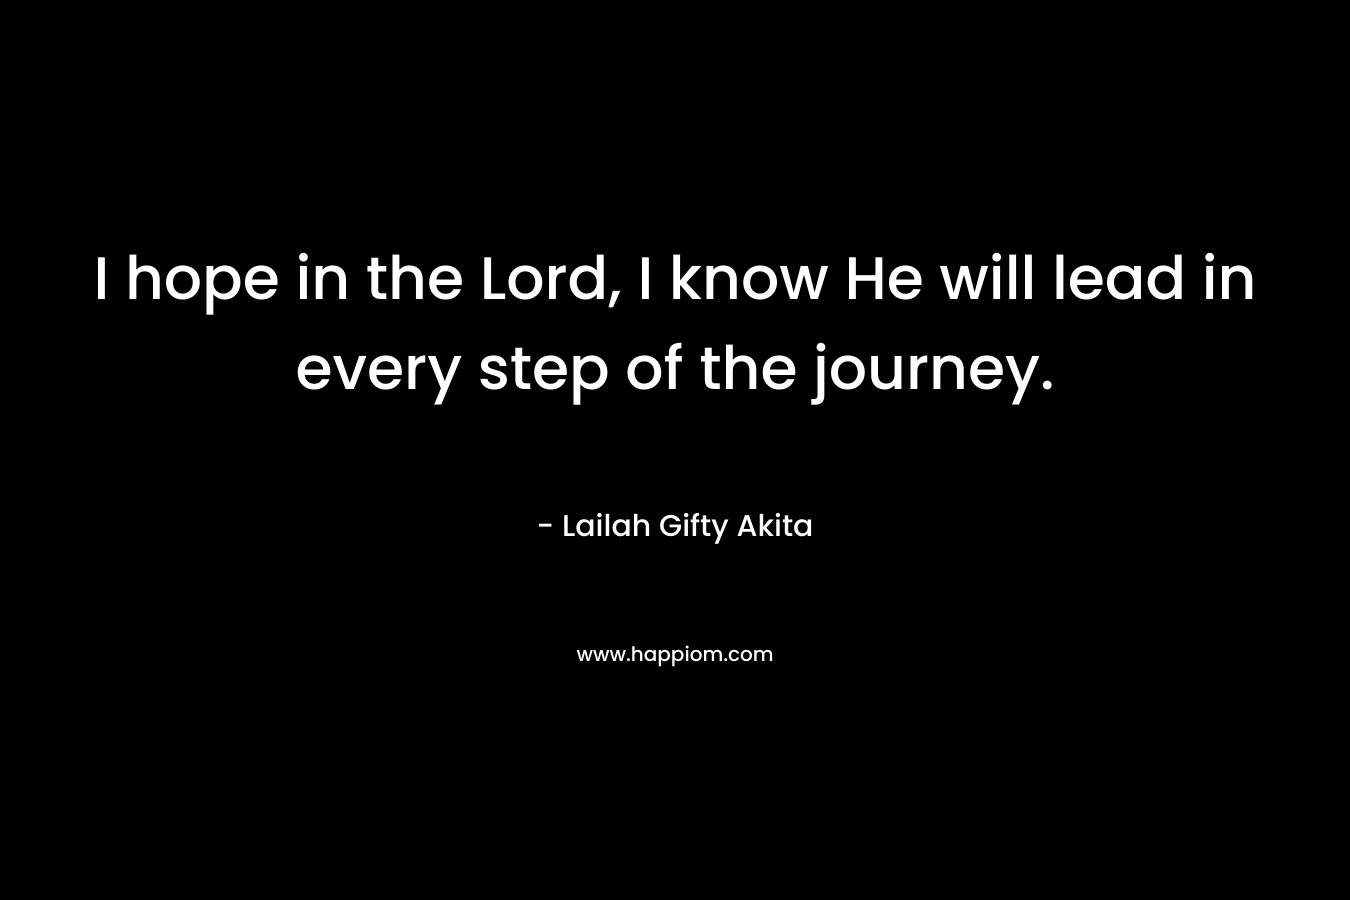 I hope in the Lord, I know He will lead in every step of the journey.